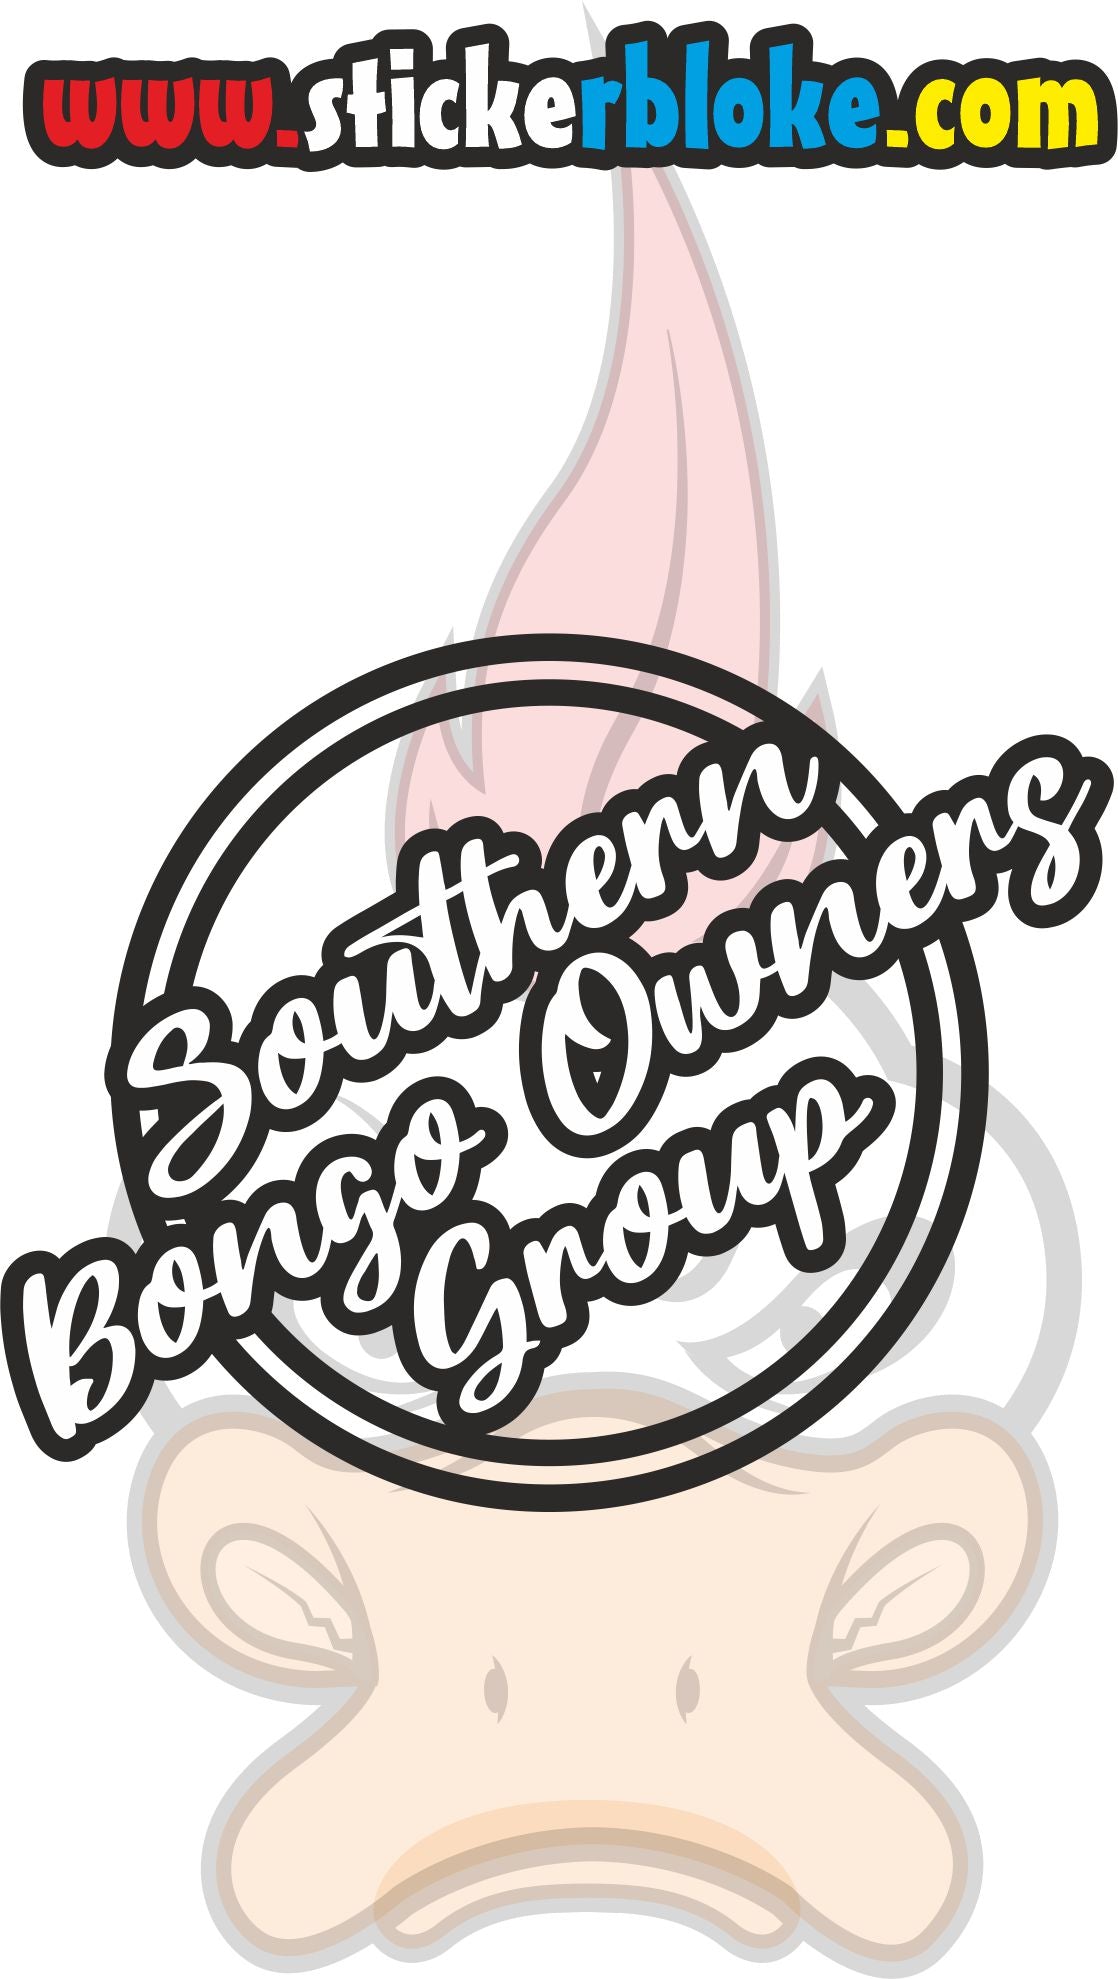 SOUTHERN BONGO OWNERS CLUB STICKER